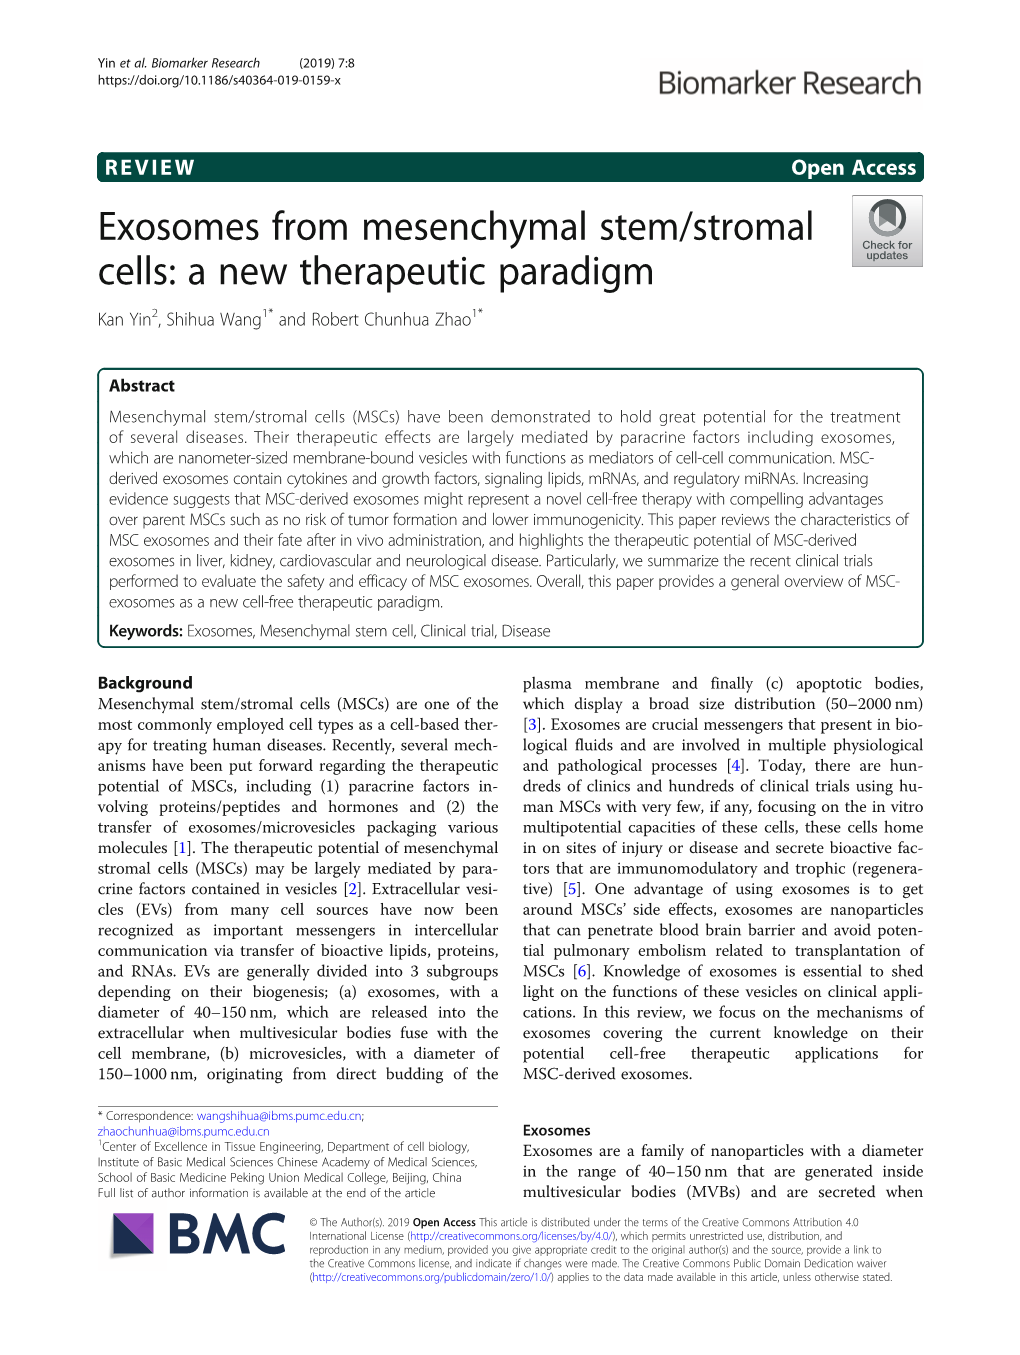 Exosomes from Mesenchymal Stem/Stromal Cells: a New Therapeutic Paradigm Kan Yin2, Shihua Wang1* and Robert Chunhua Zhao1*